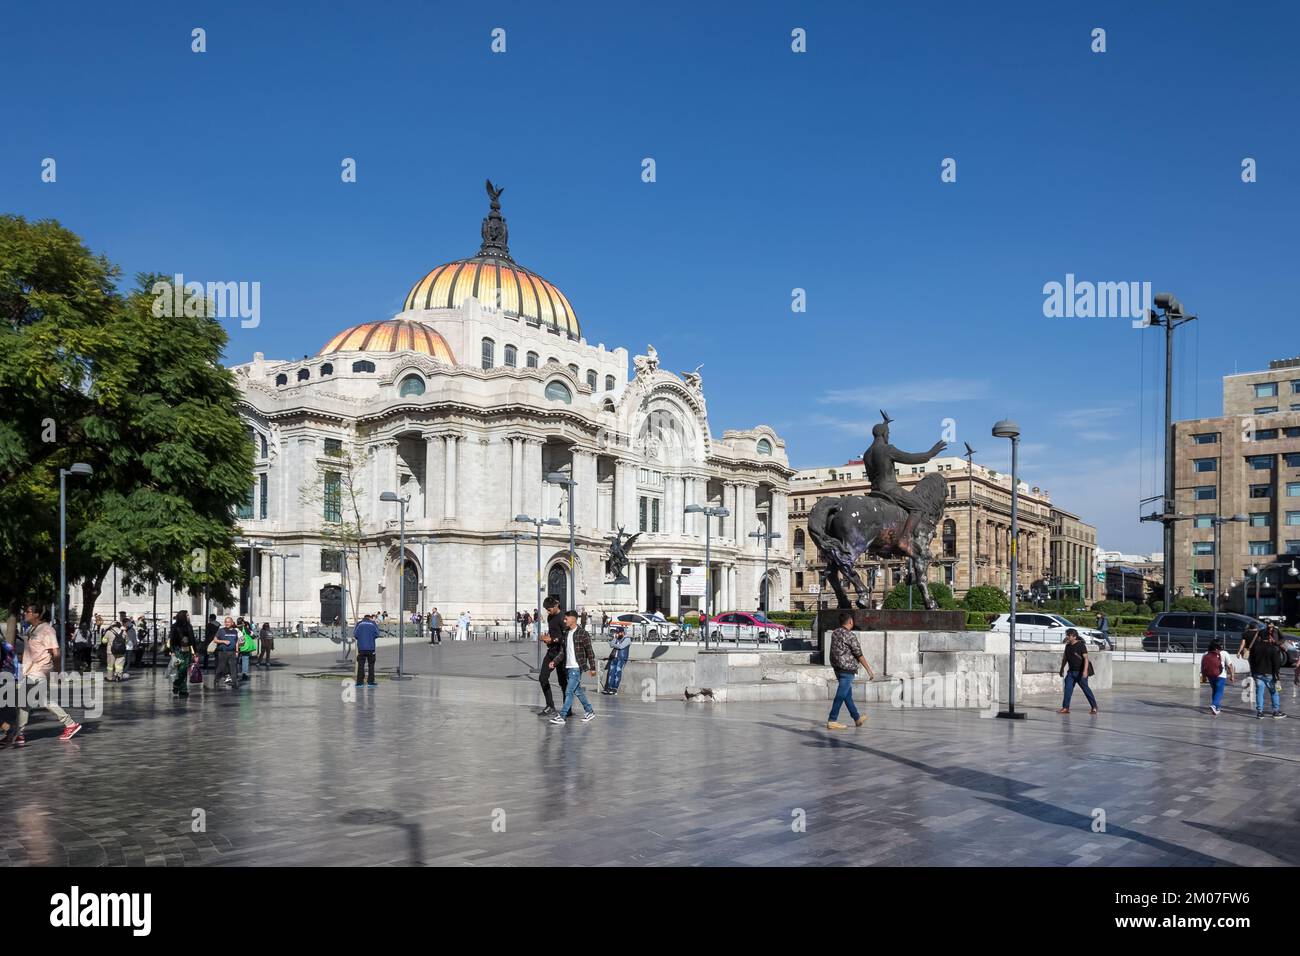 Architectural detail of the Palacio de Bellas Artes (Palace of Fine Arts), a prominent cultural center in Mexico City located in the city center Stock Photo